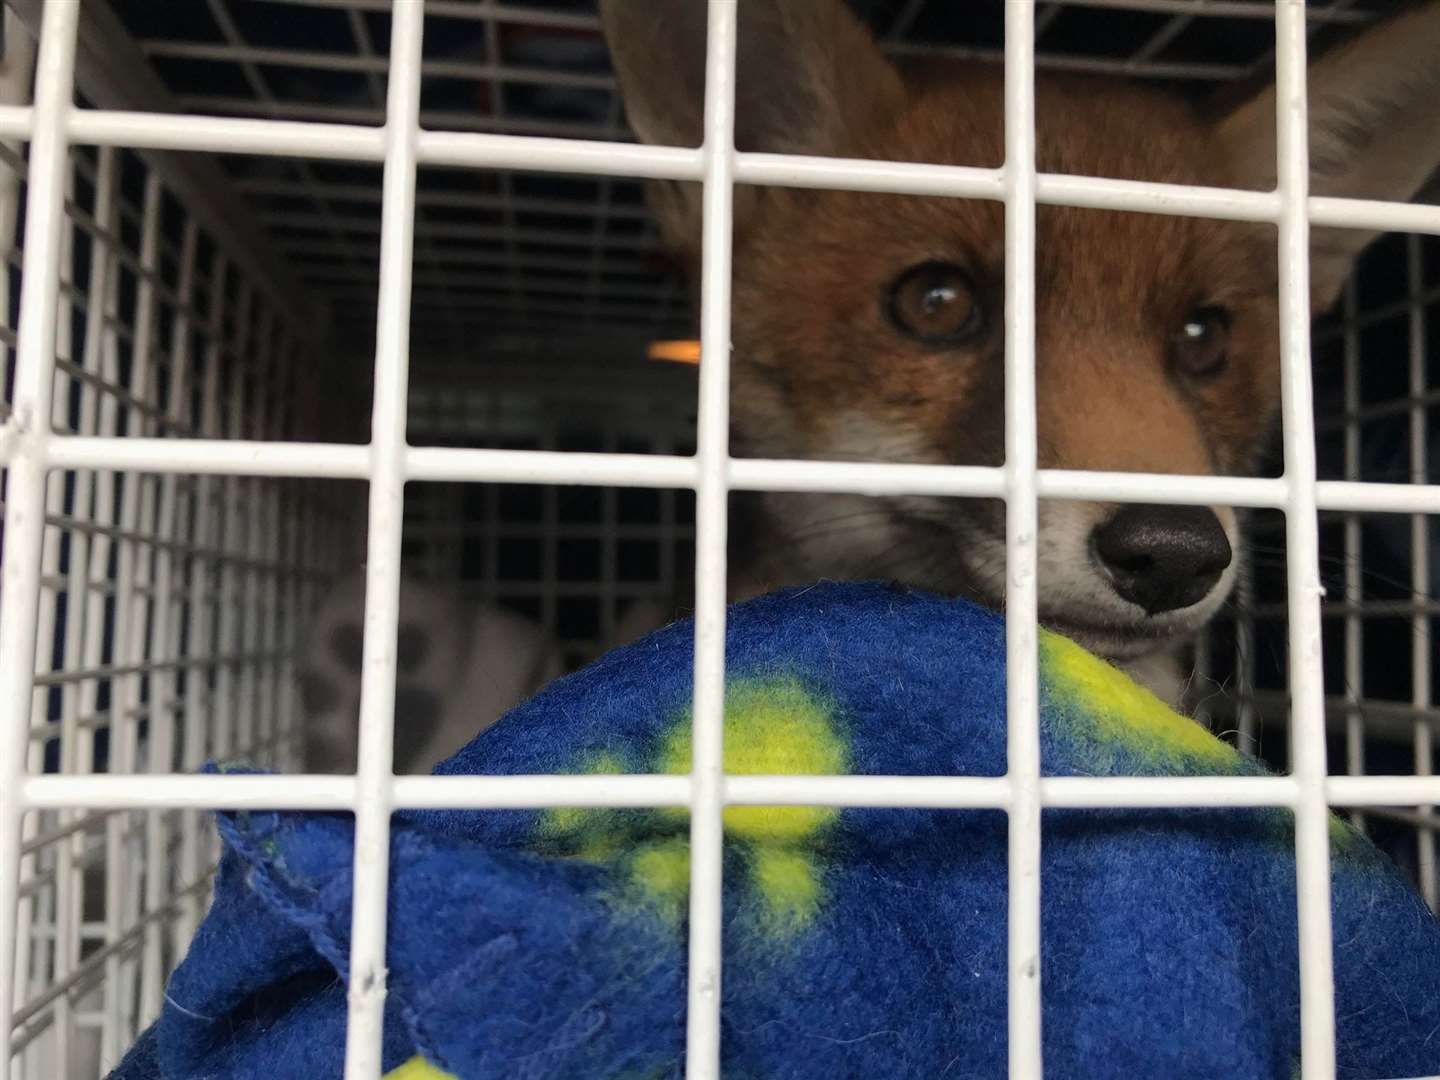 Back to safety. The young fox was taken into the care of the RSPCA